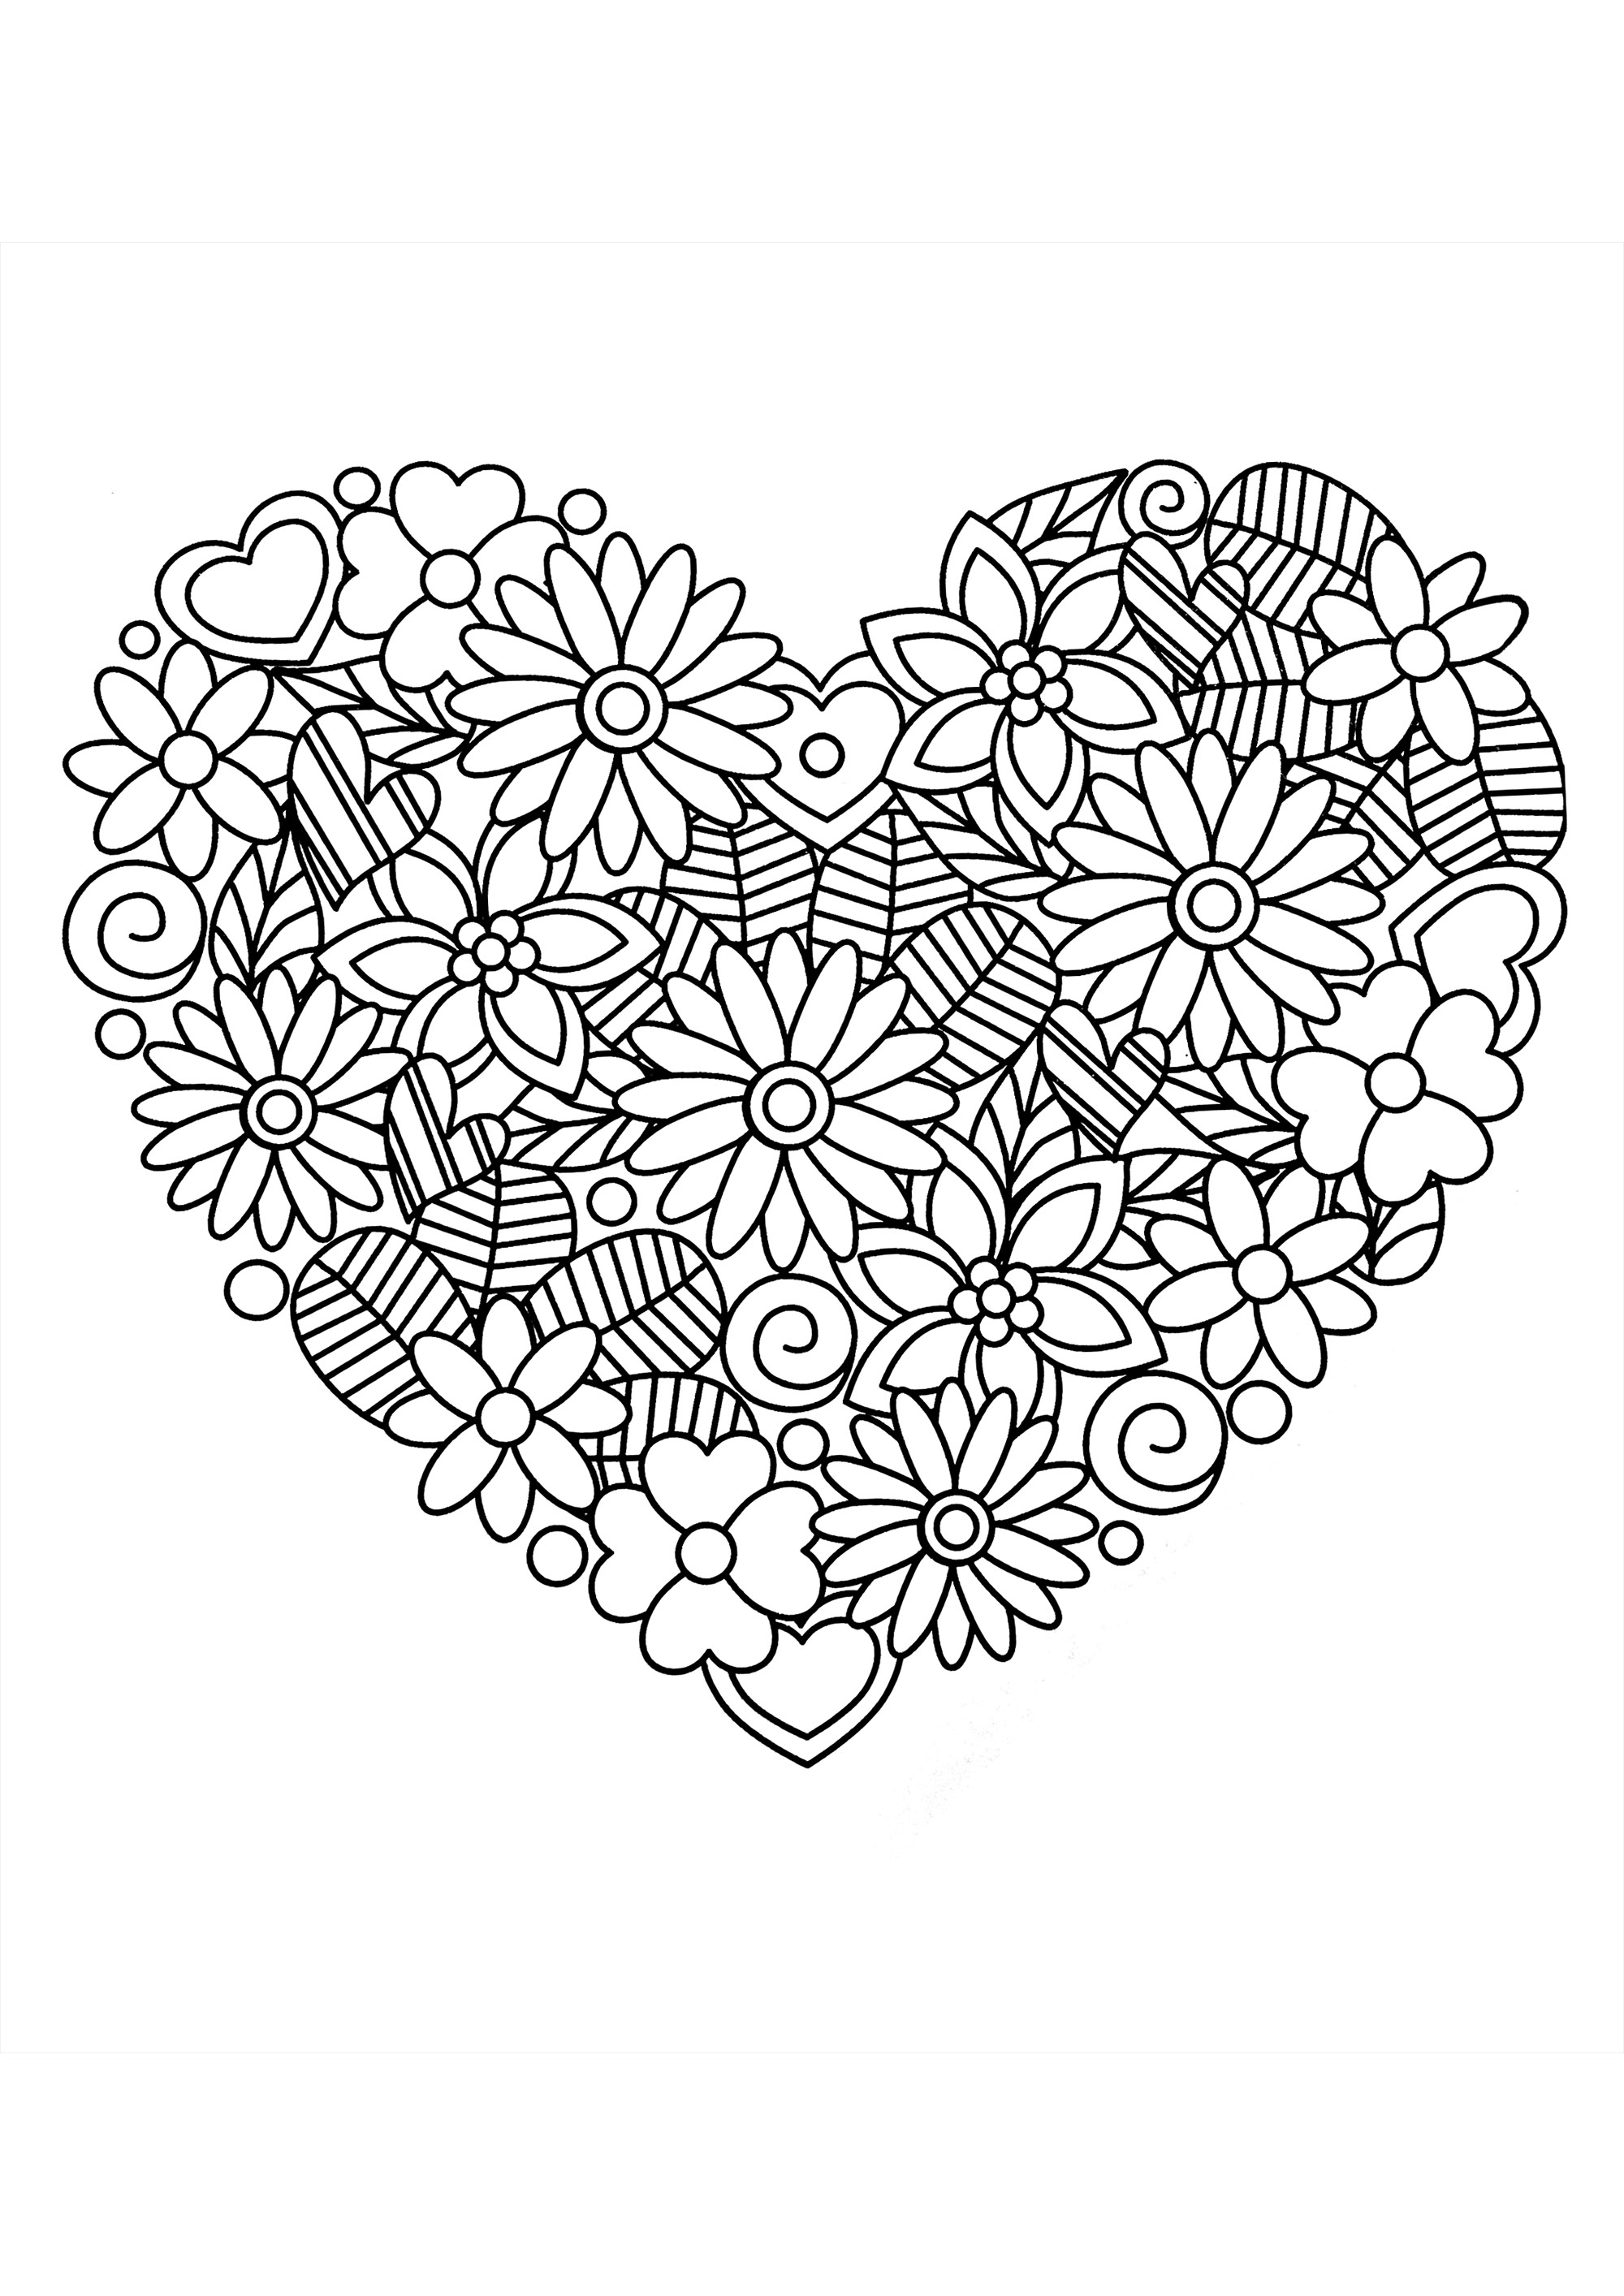 Pretty heart of flowers and leaves - Flowers Adult Coloring Pages